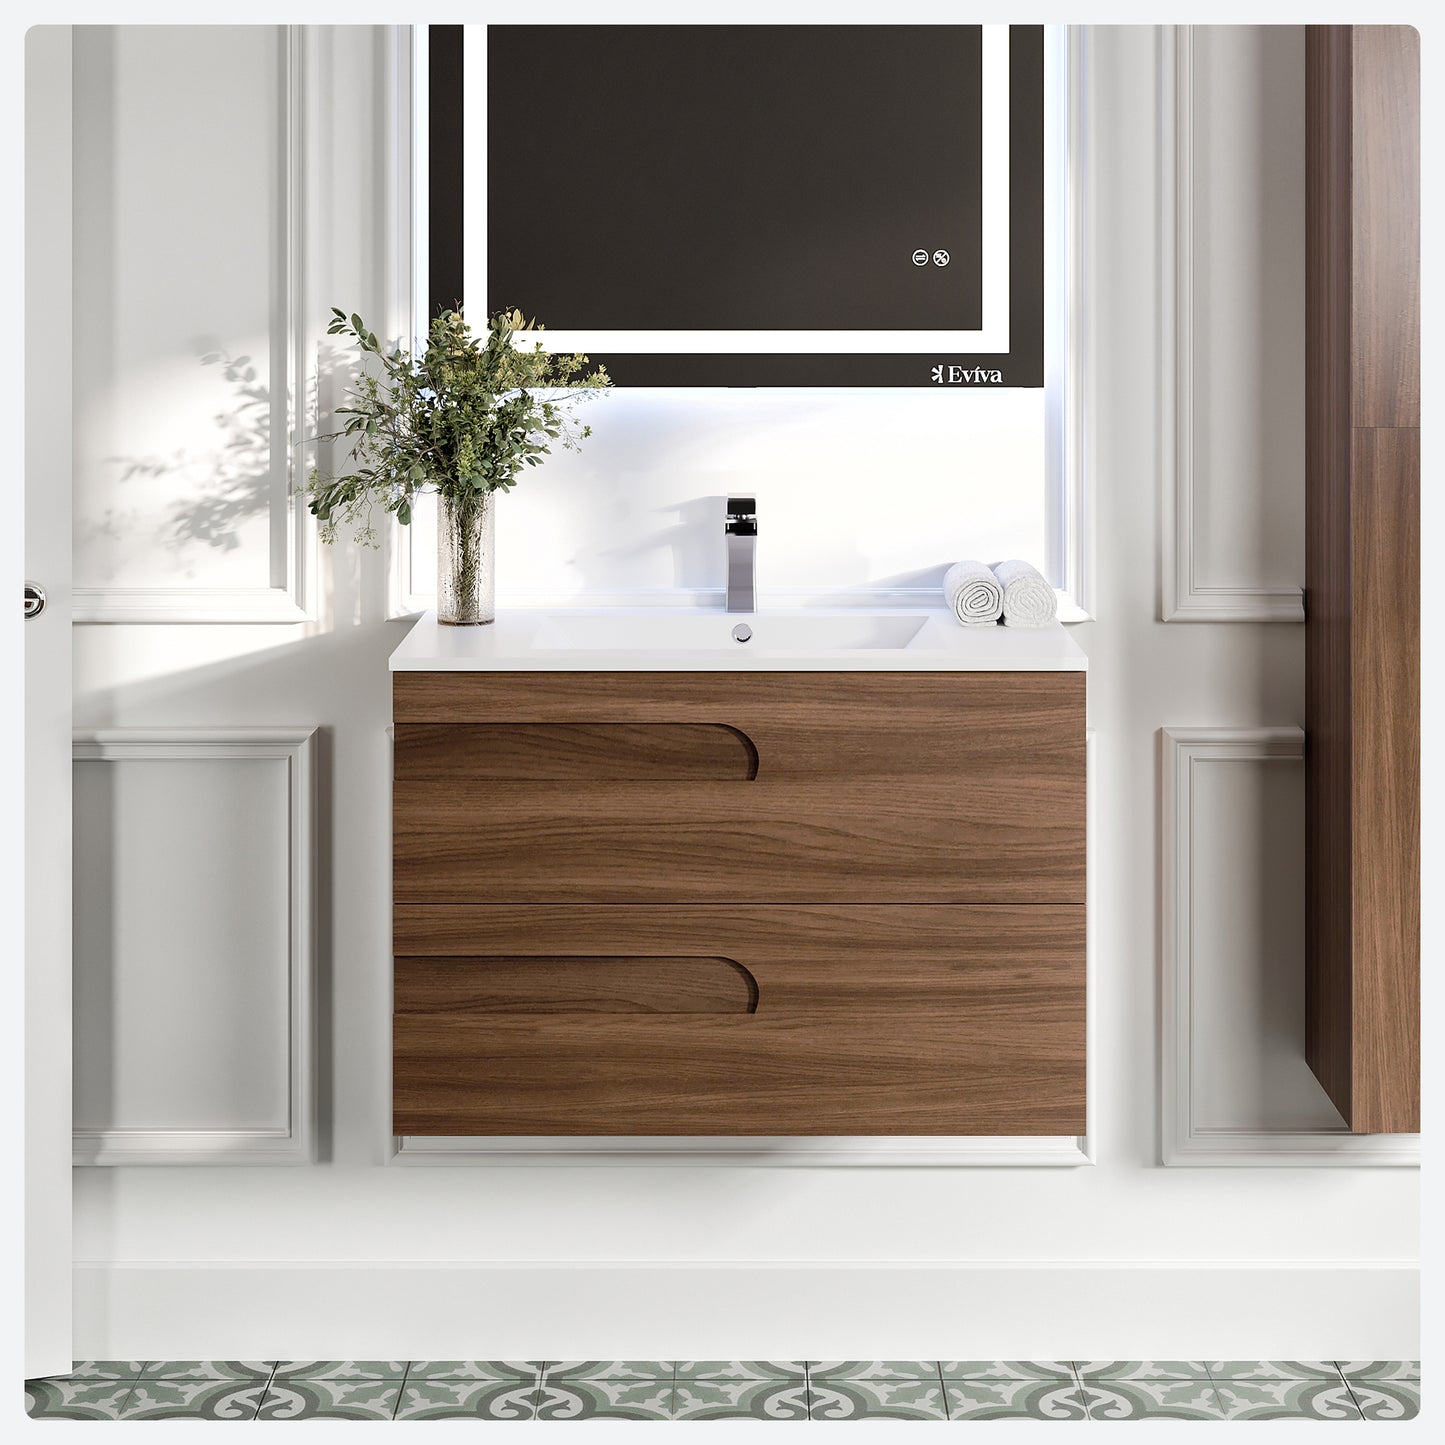 Joy 32"W x 18"D Rosewood Bathroom Vanity with Porcelain Countertop and Integrated Sink